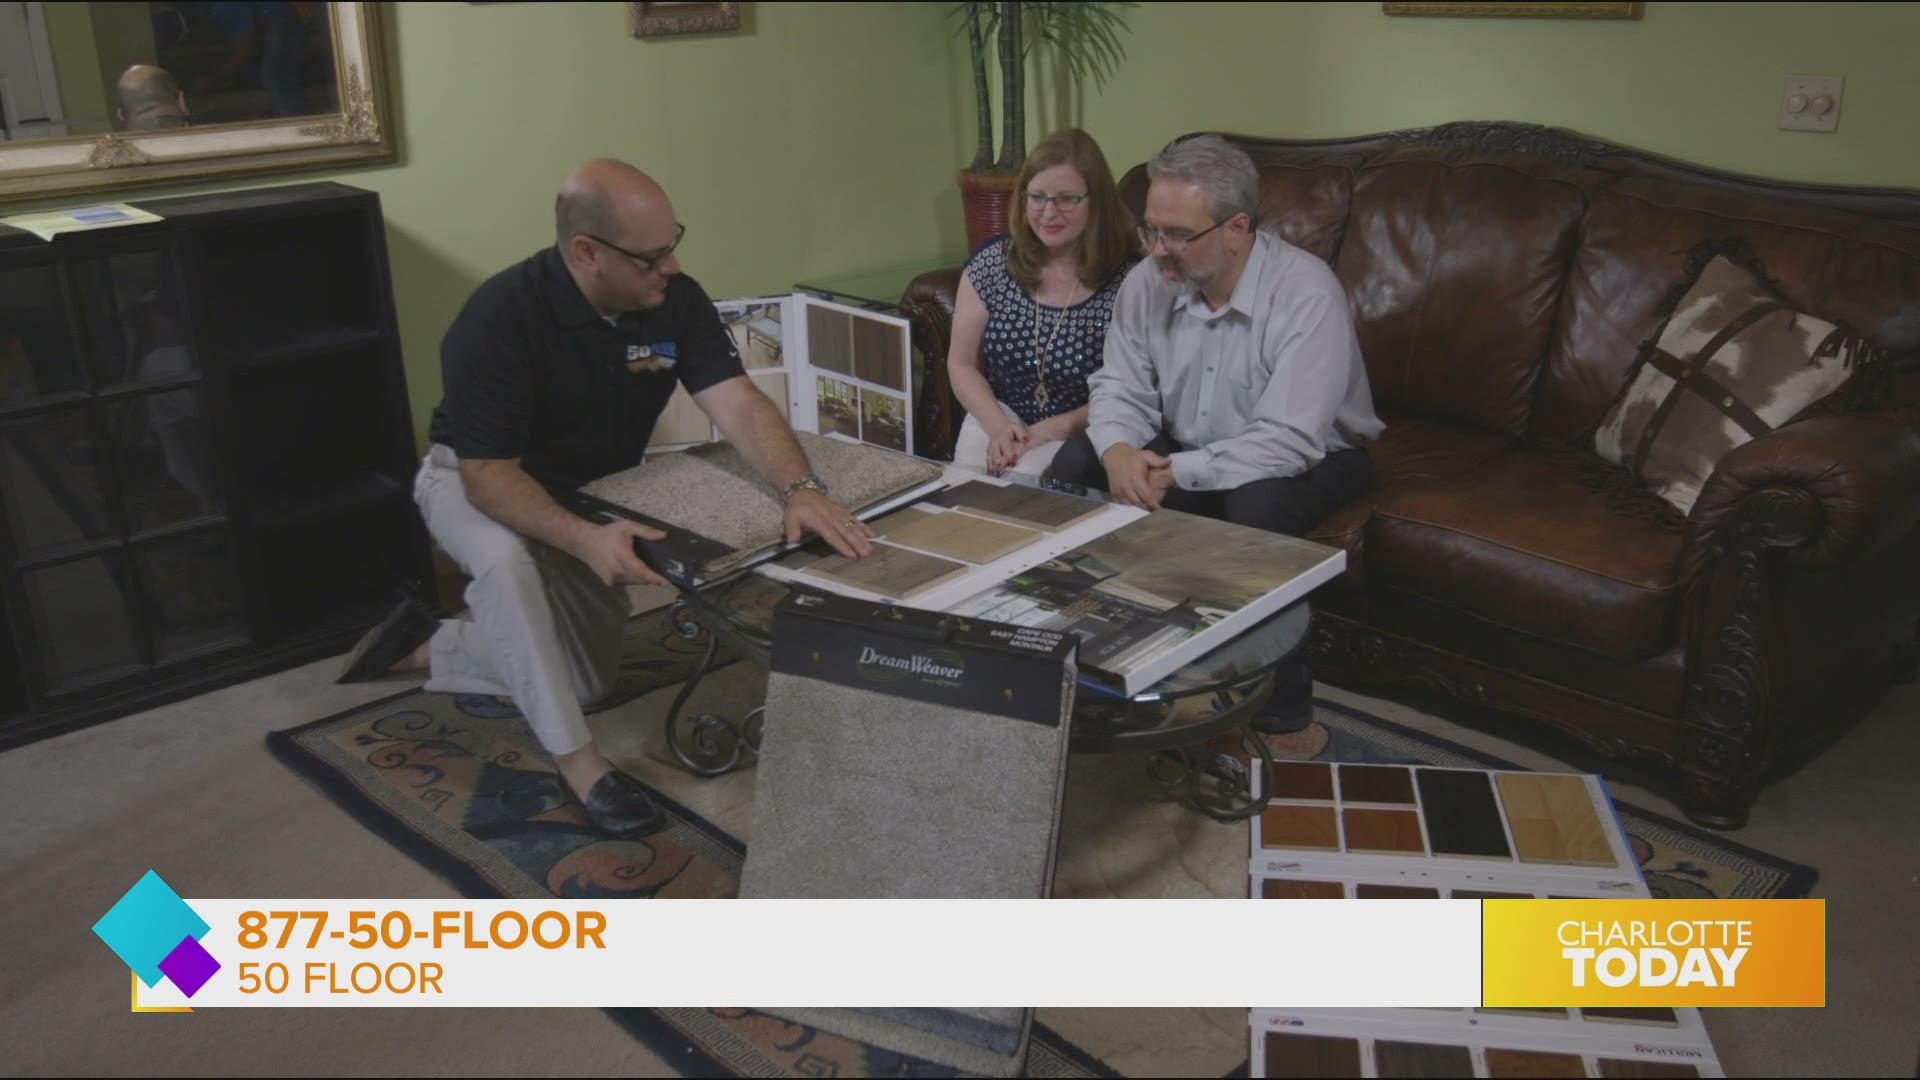 50 Floor makes it easy to tackle a big home improvement project.